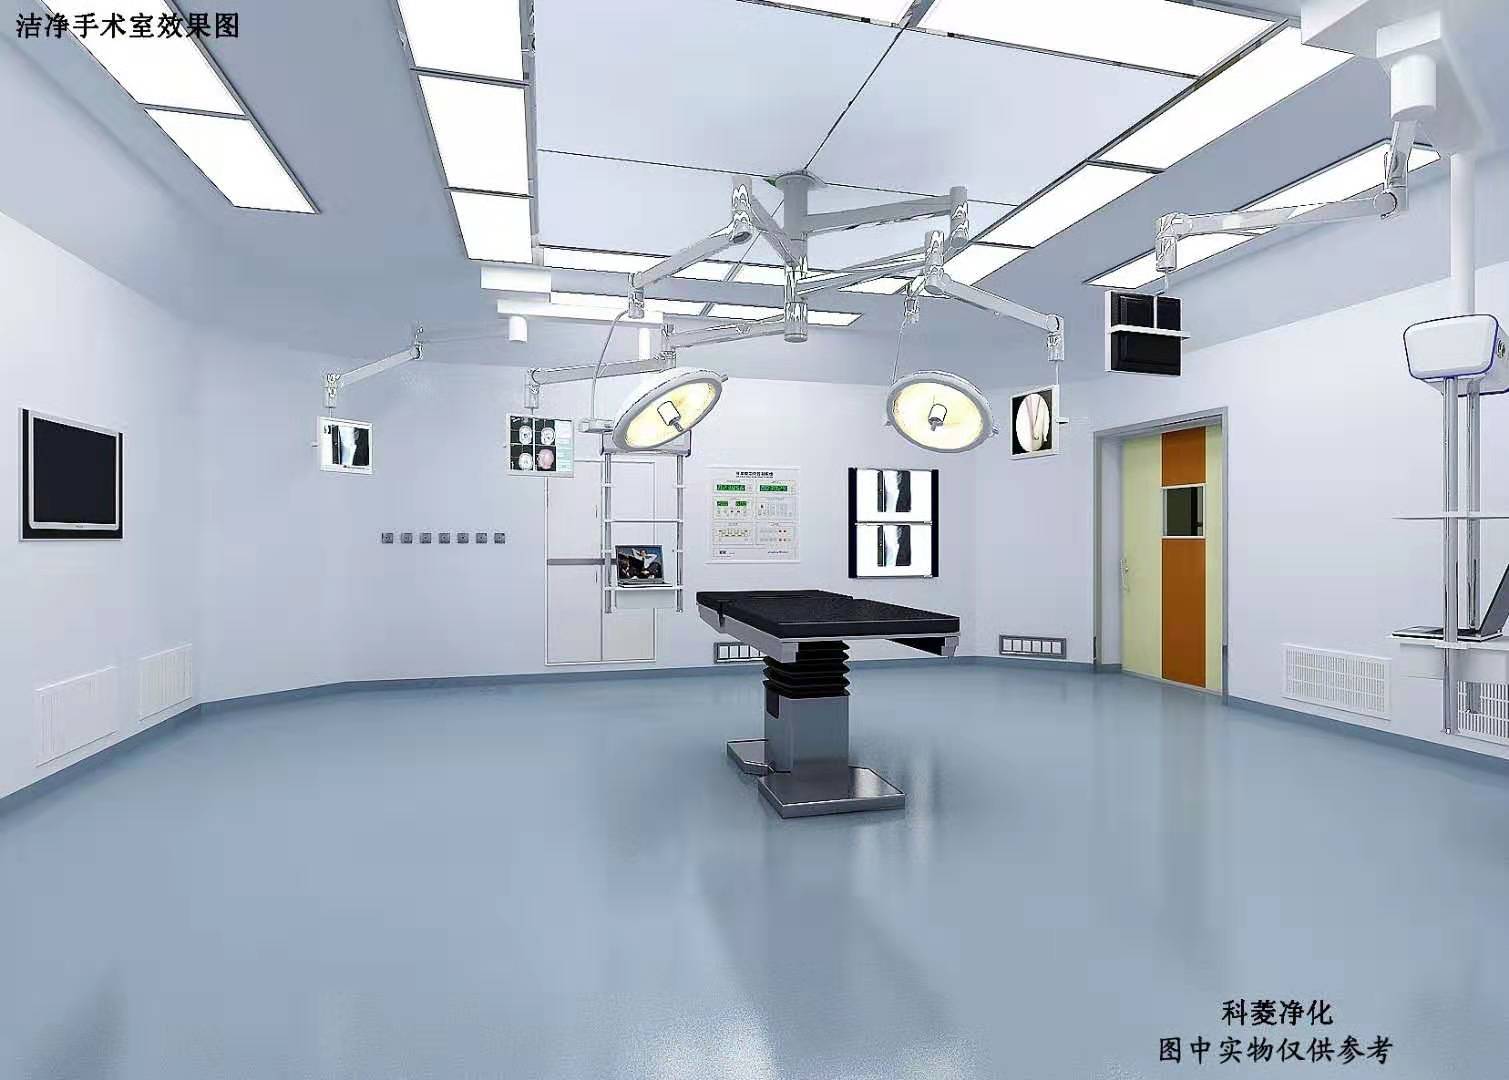 >What are the mandatory requirements in the renovation project of the hospital operating room?